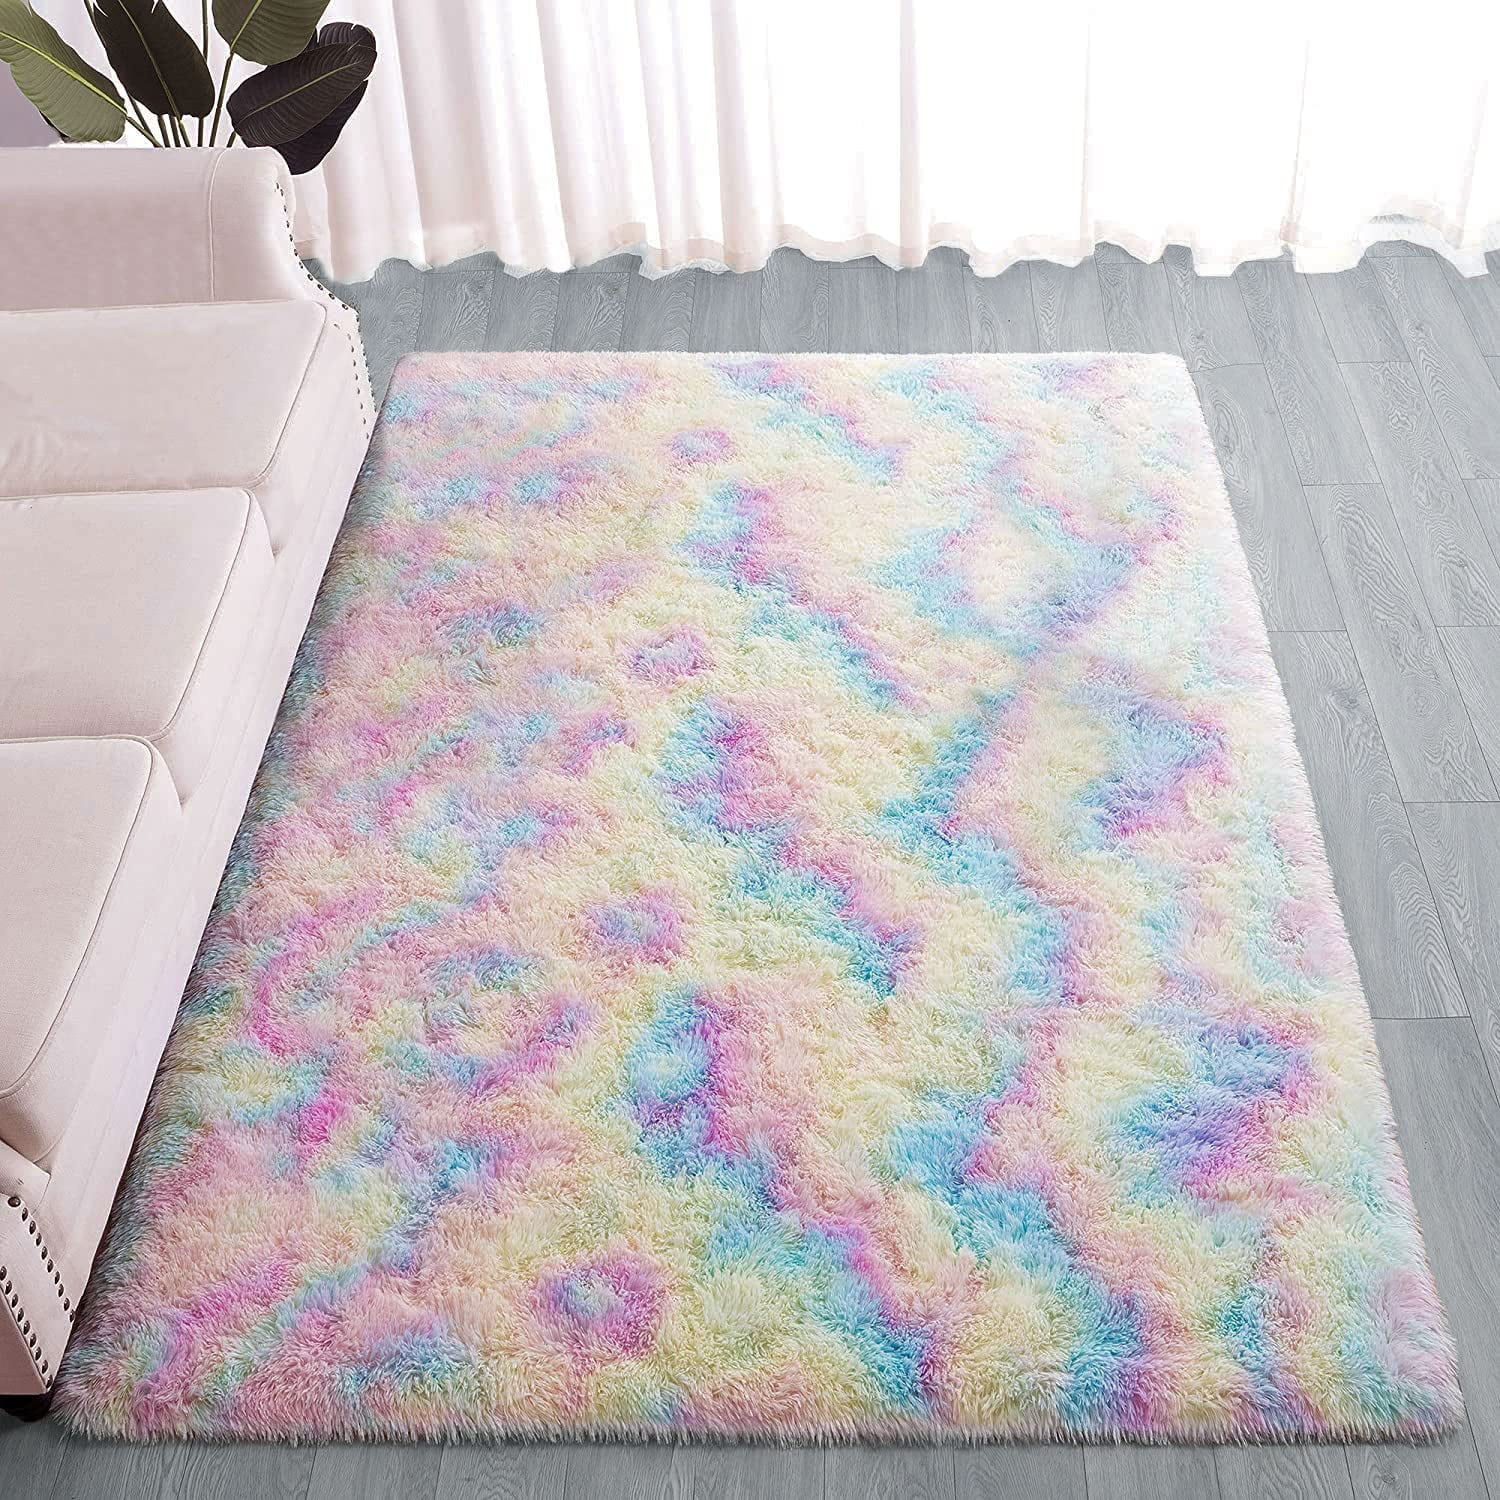 QUALITY DEEP PILE VERY SOFT NON SHED SHAGGY LOW COST PRICE RUG IN 100 x 150 cm 